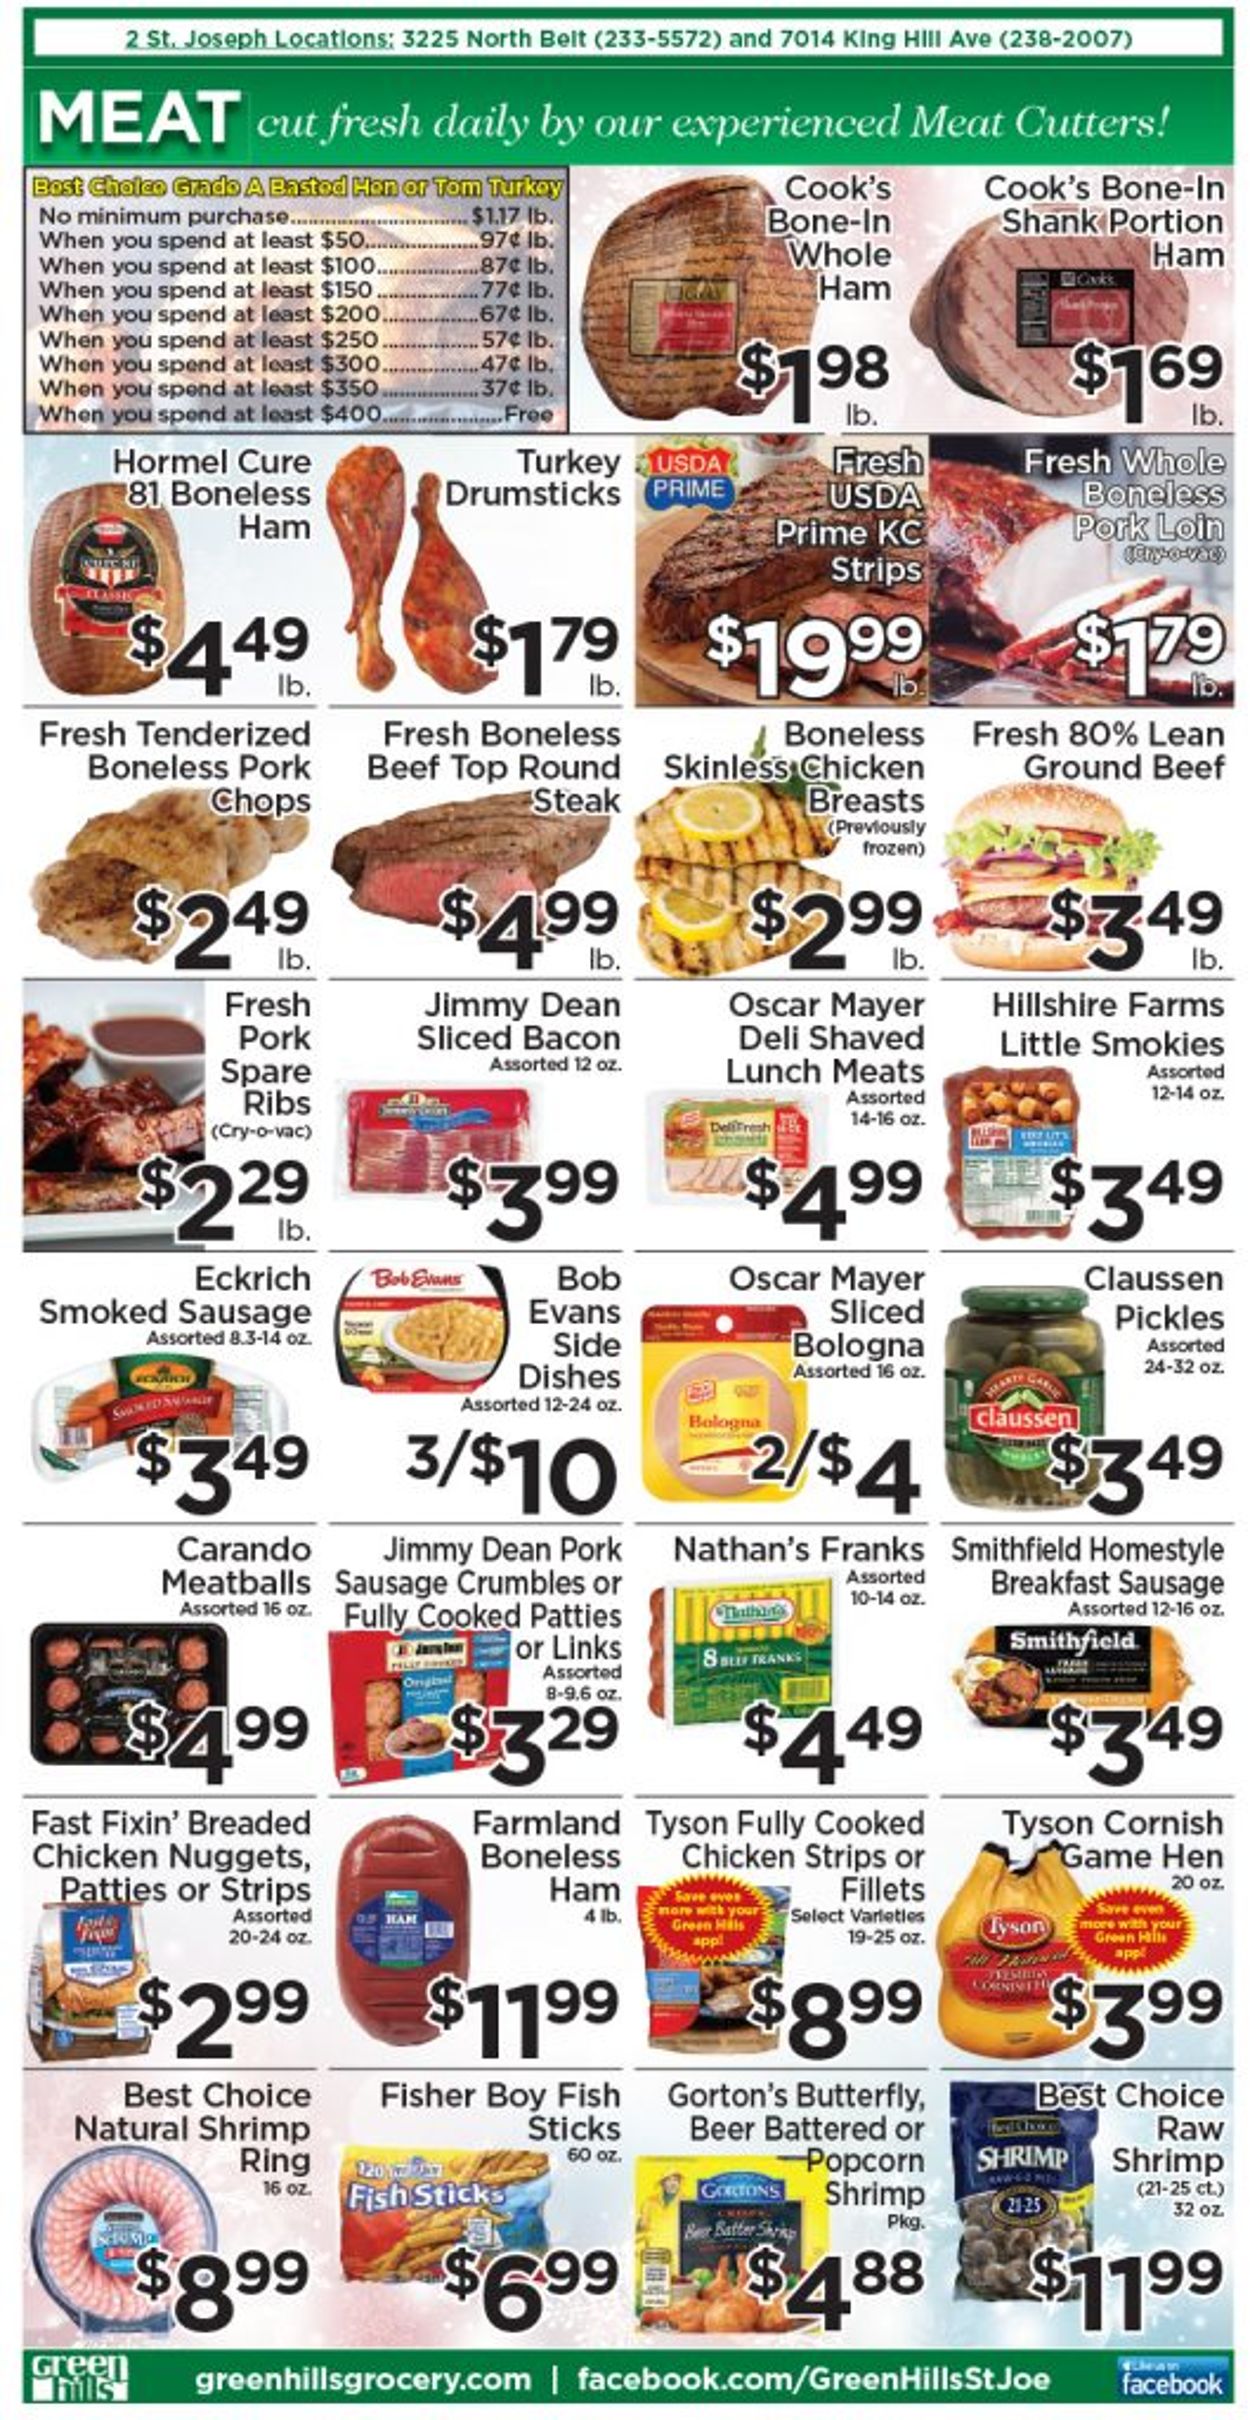 Green Hills Grocery HOLIDAY 2021 Weekly Ad Circular - valid 12/15-12/21/2021 (Page 4)